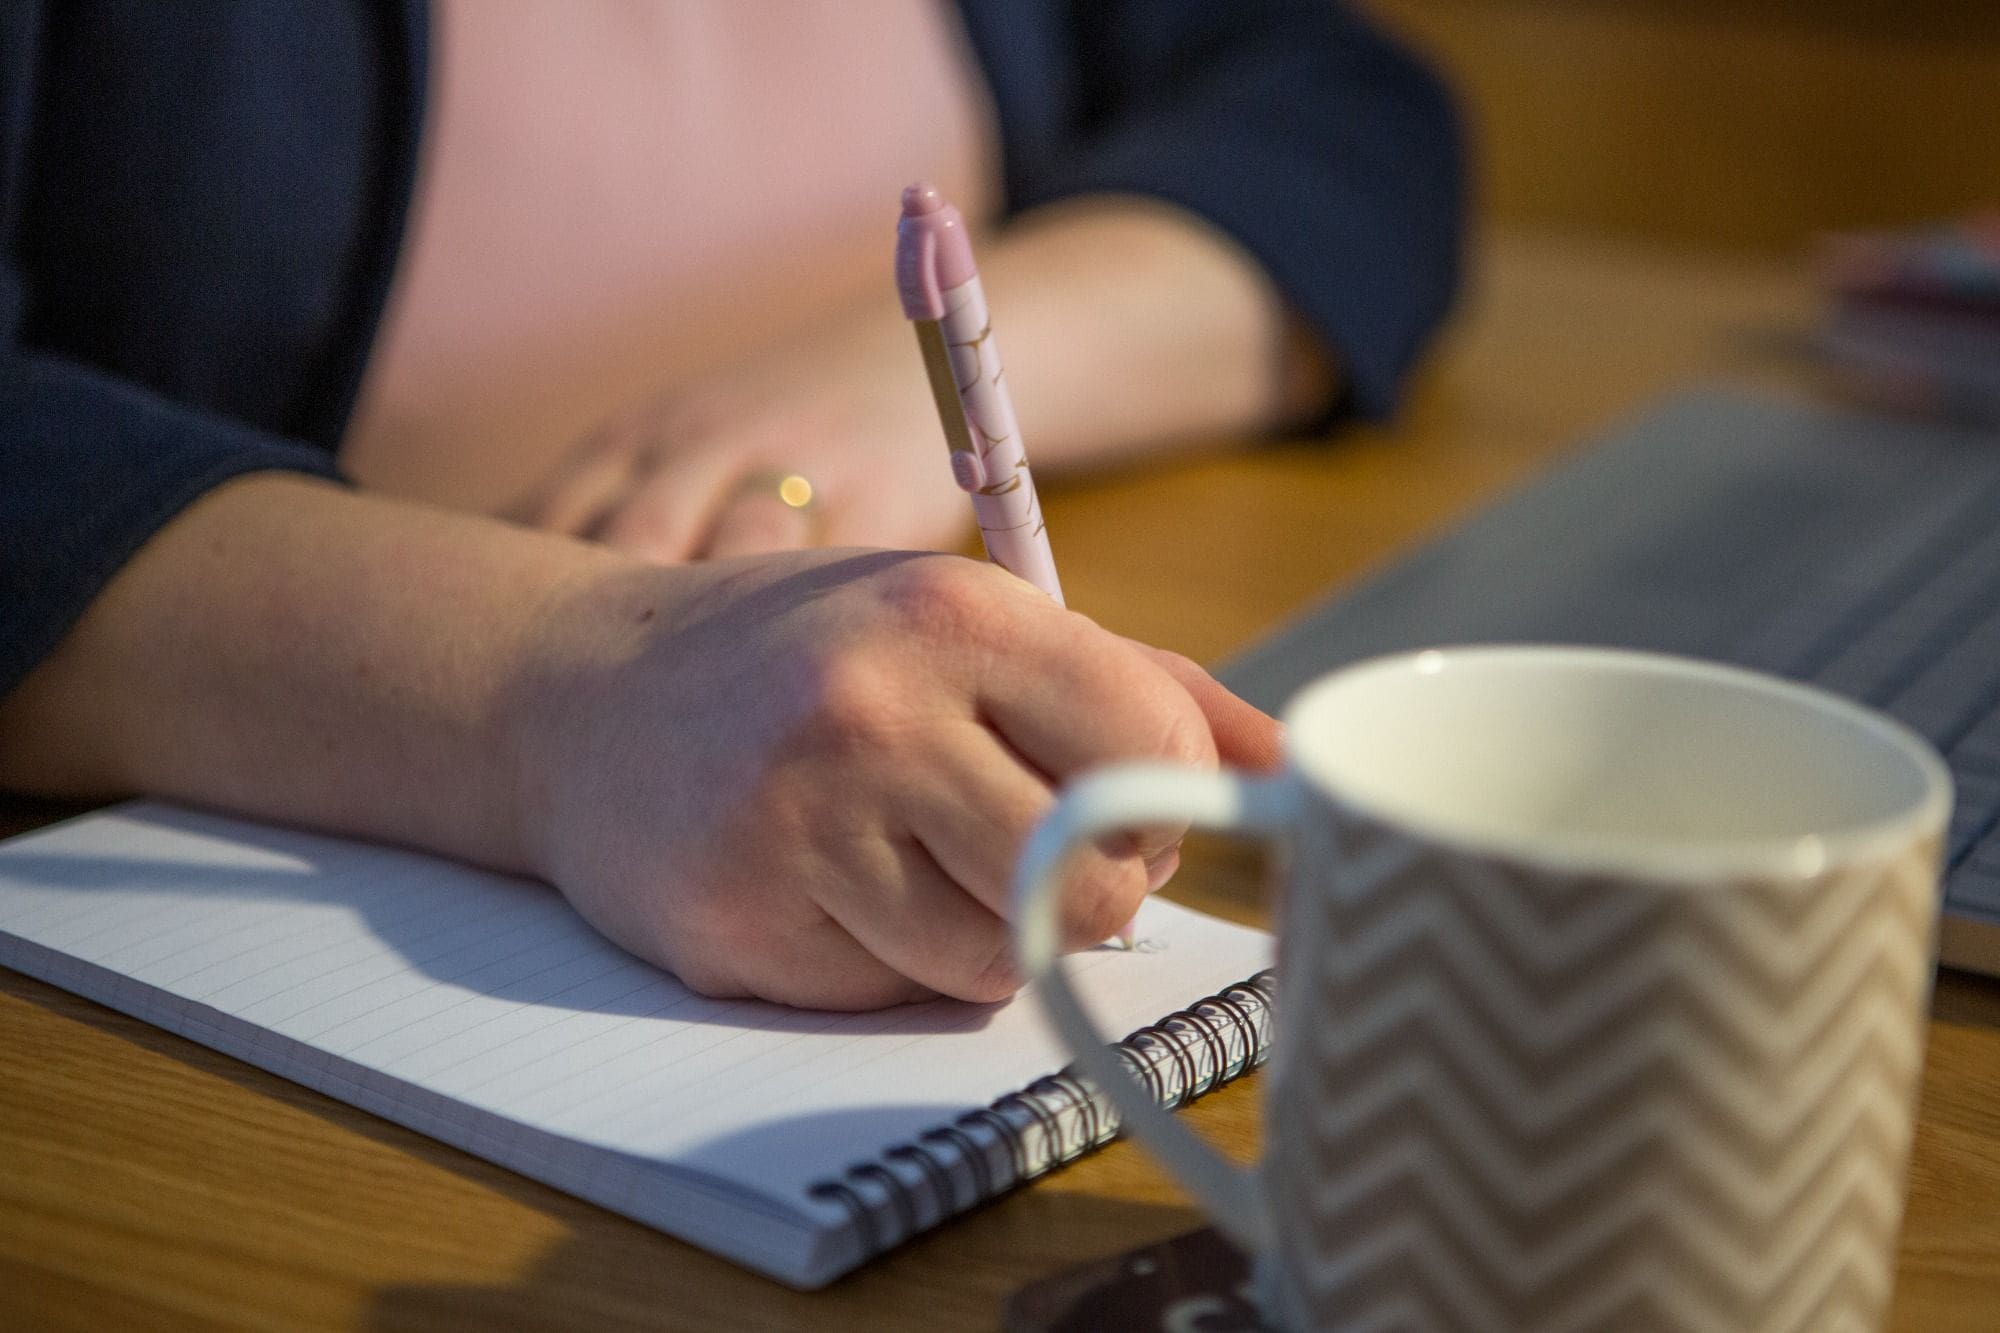 Lady writing on desk with notepad and cup